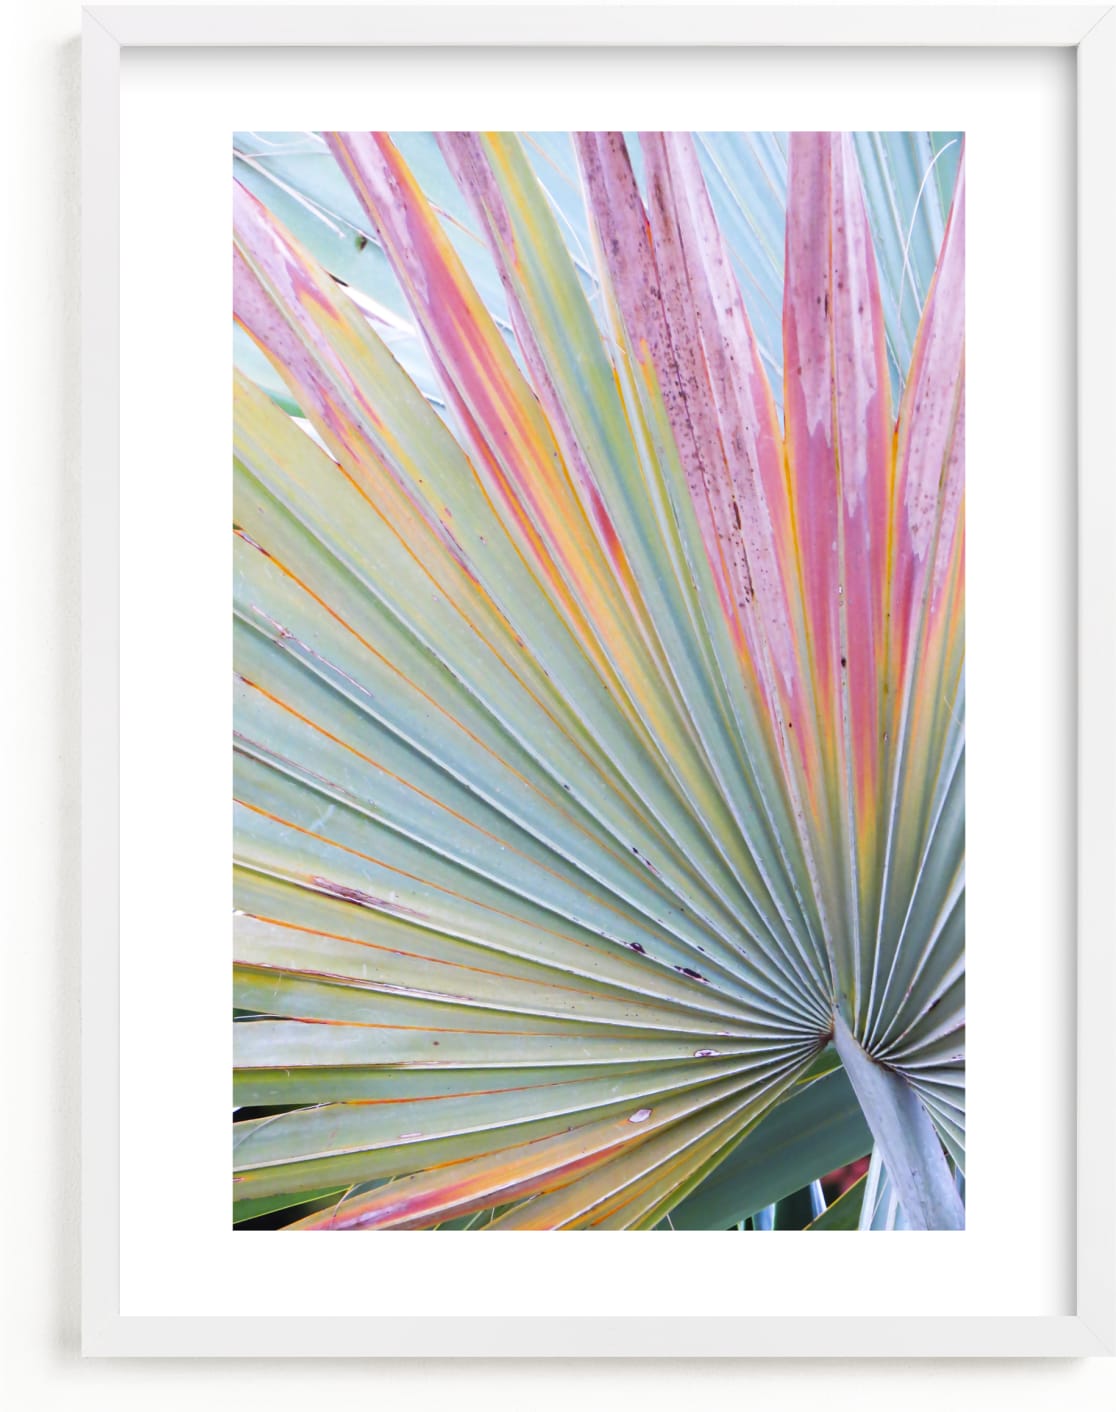 This is a green kids wall art by Eliane Lamb called Colorful fan 2.